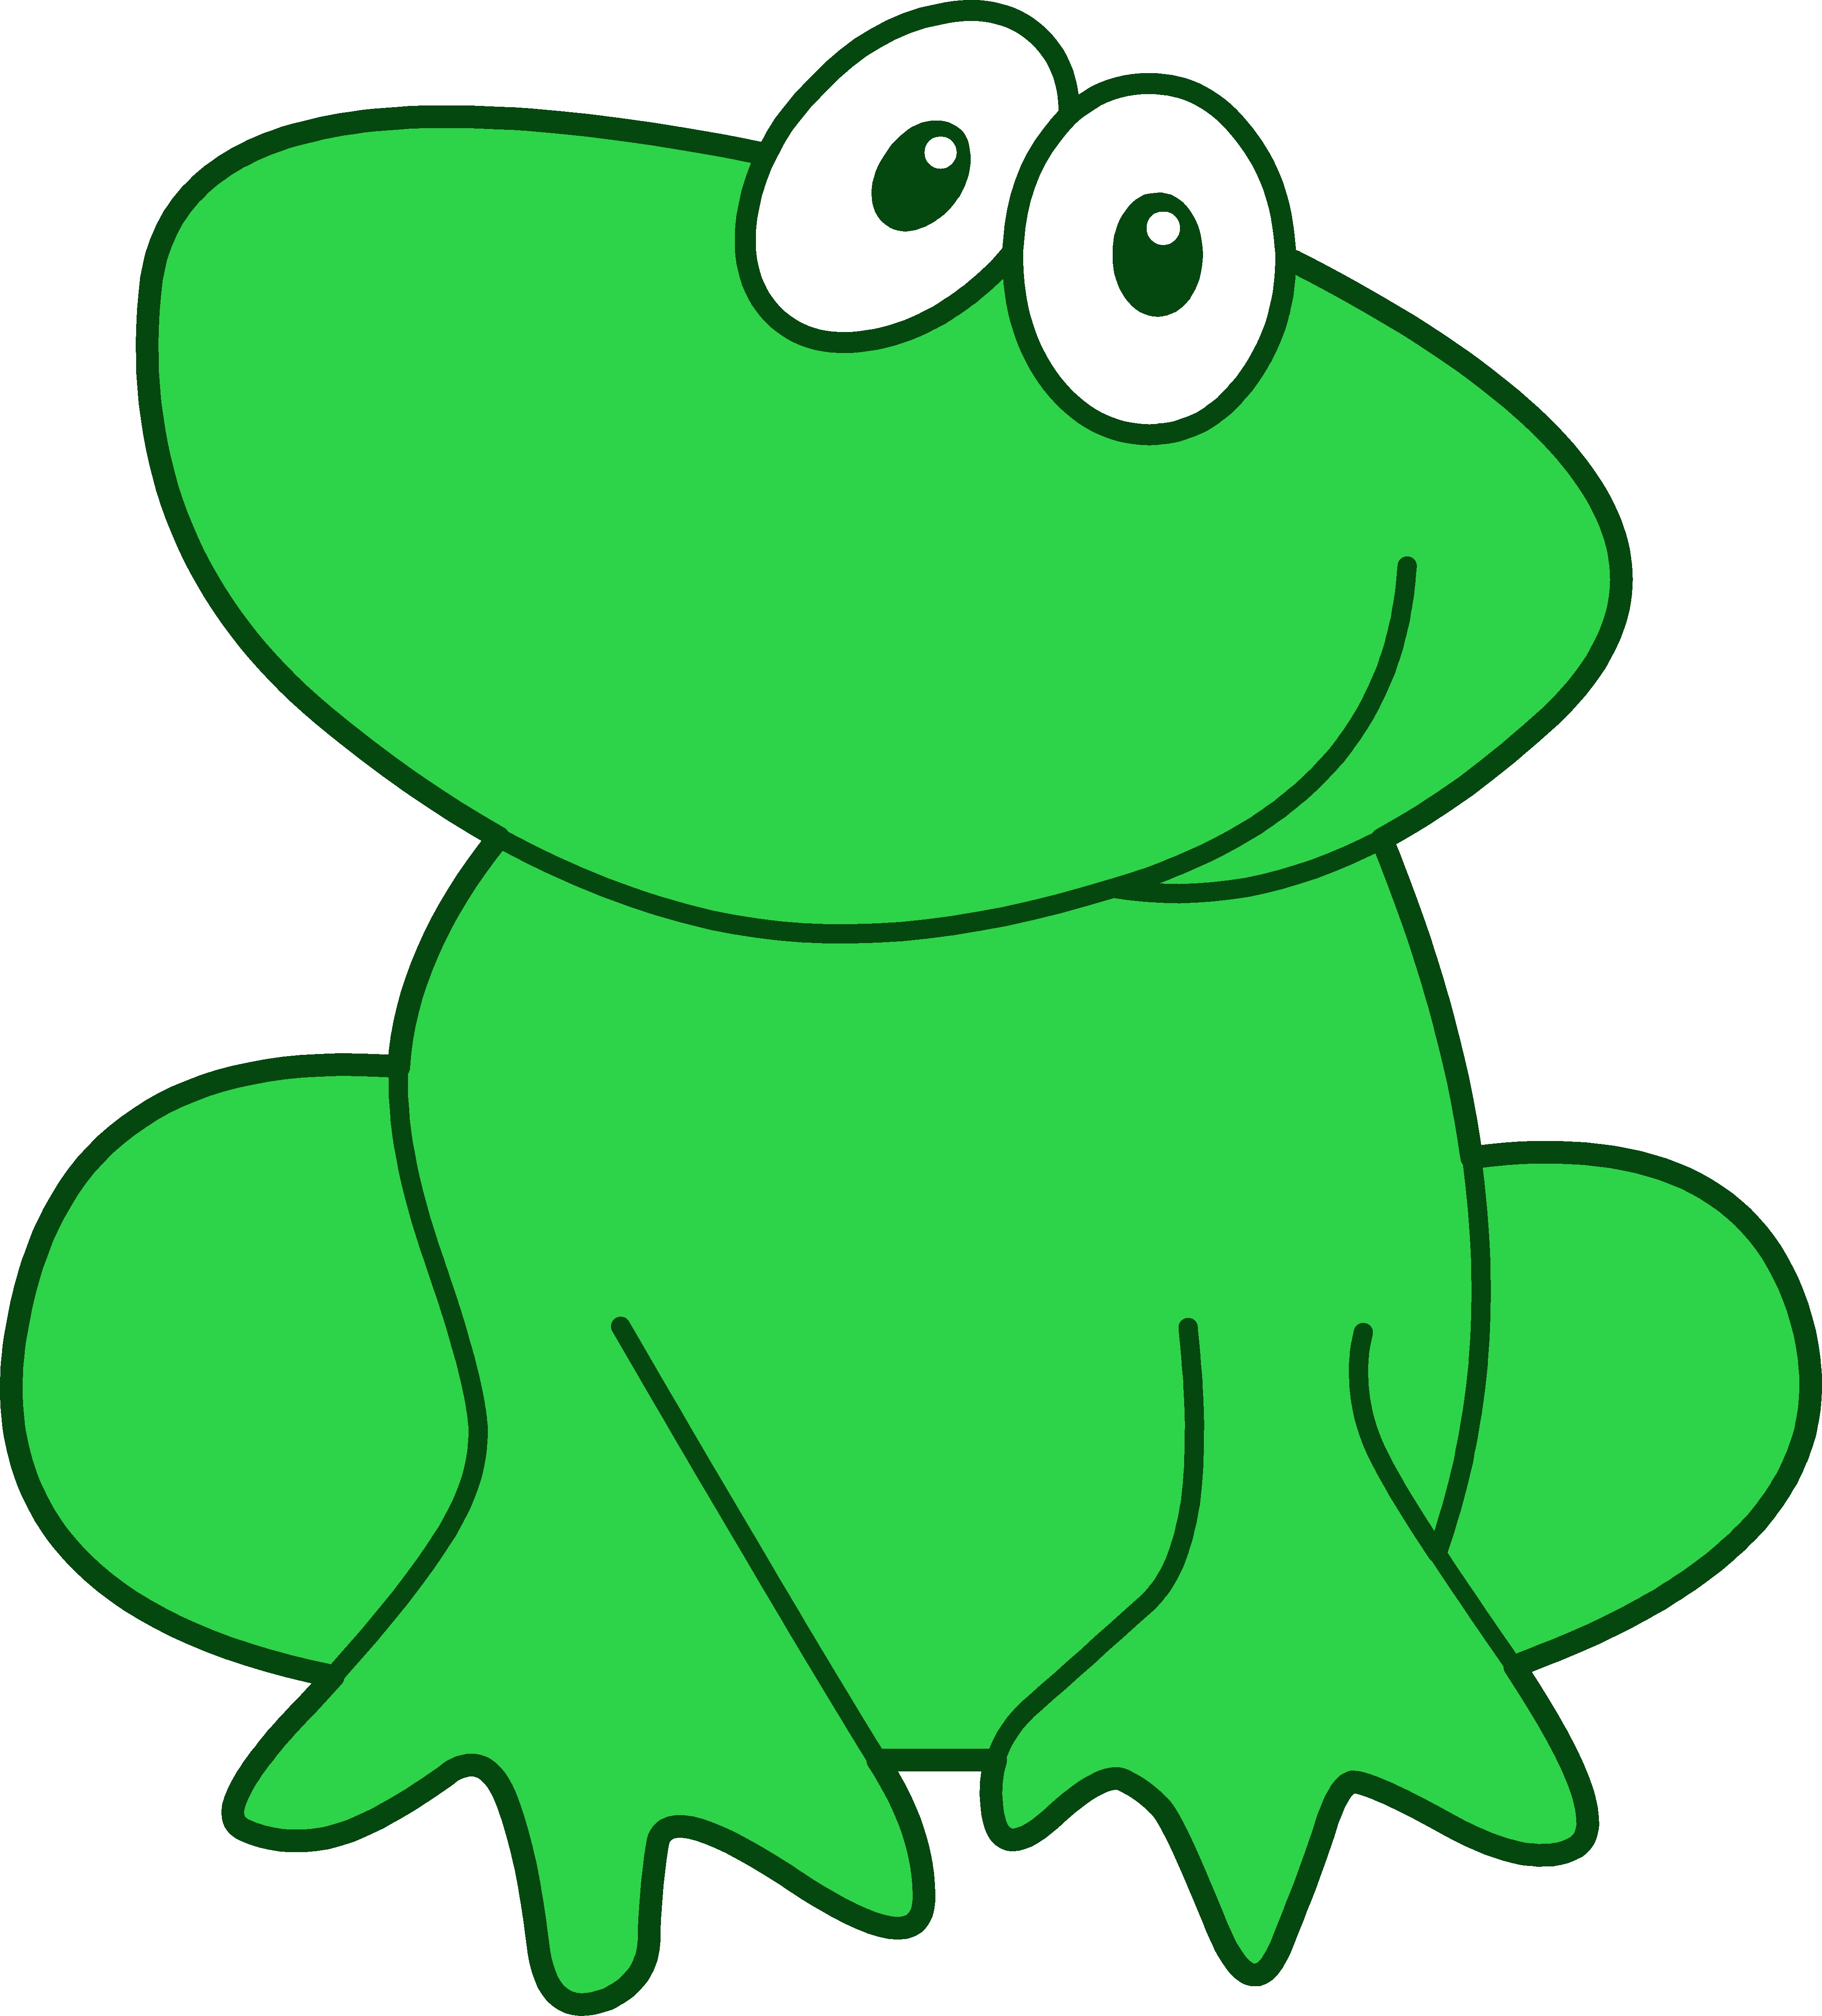 Frog clipart 3 green 6 png